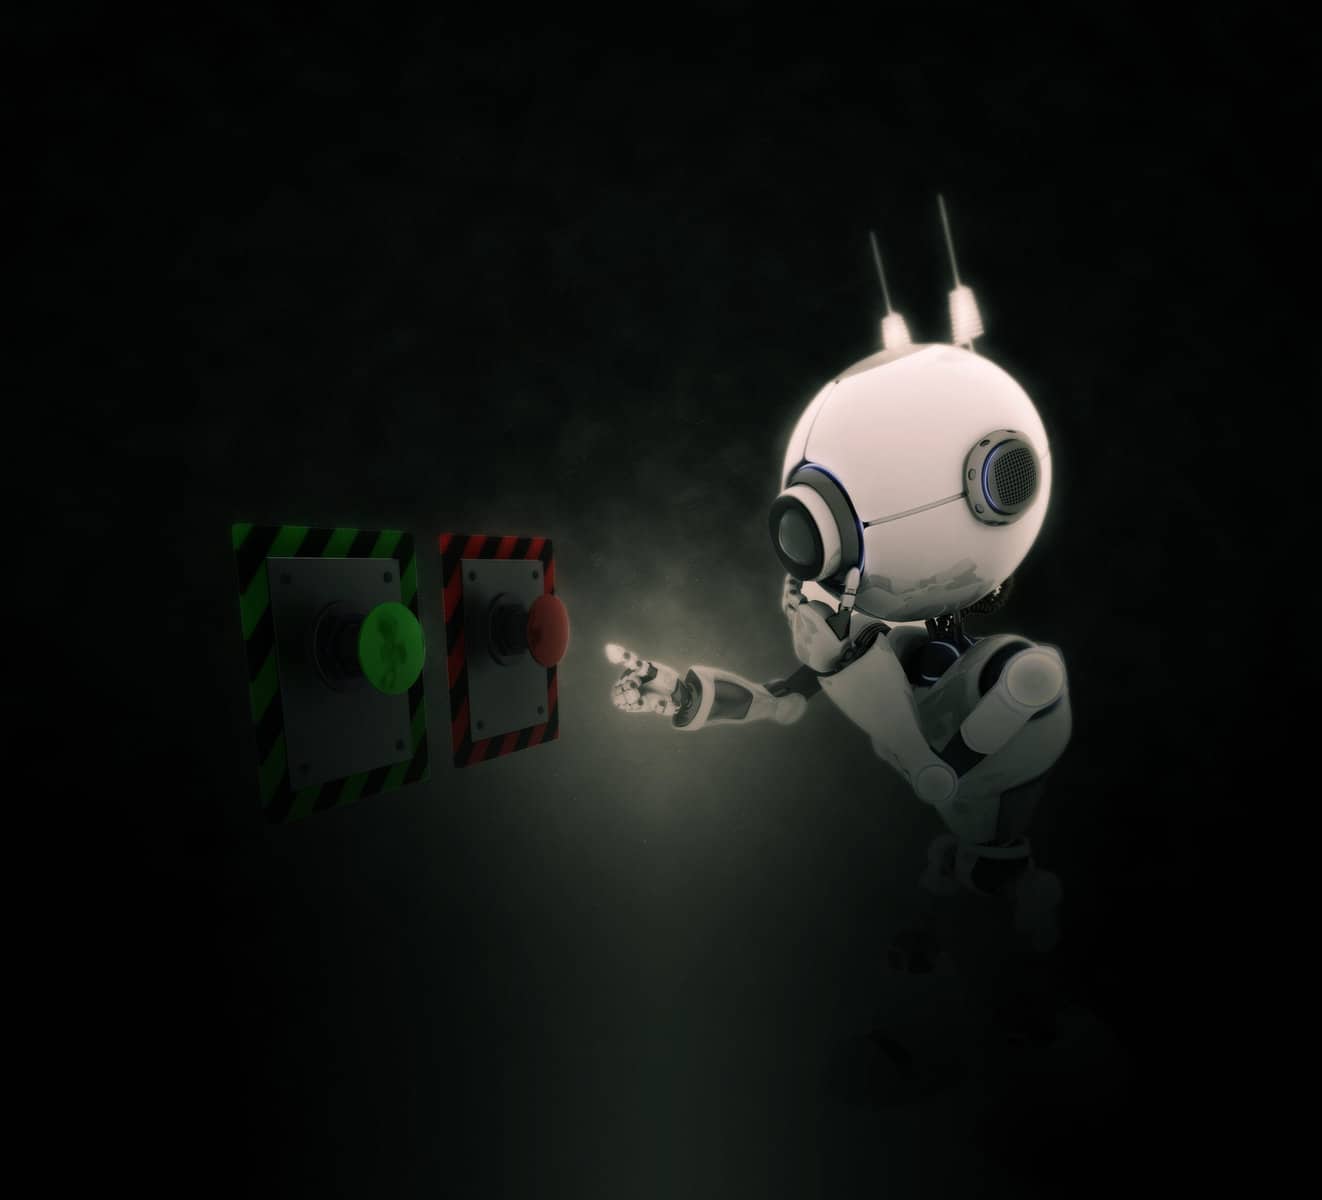 The torso of a white colored Robot is seen choosing which button to push, red or green on a dark background that obscures much of the scene.